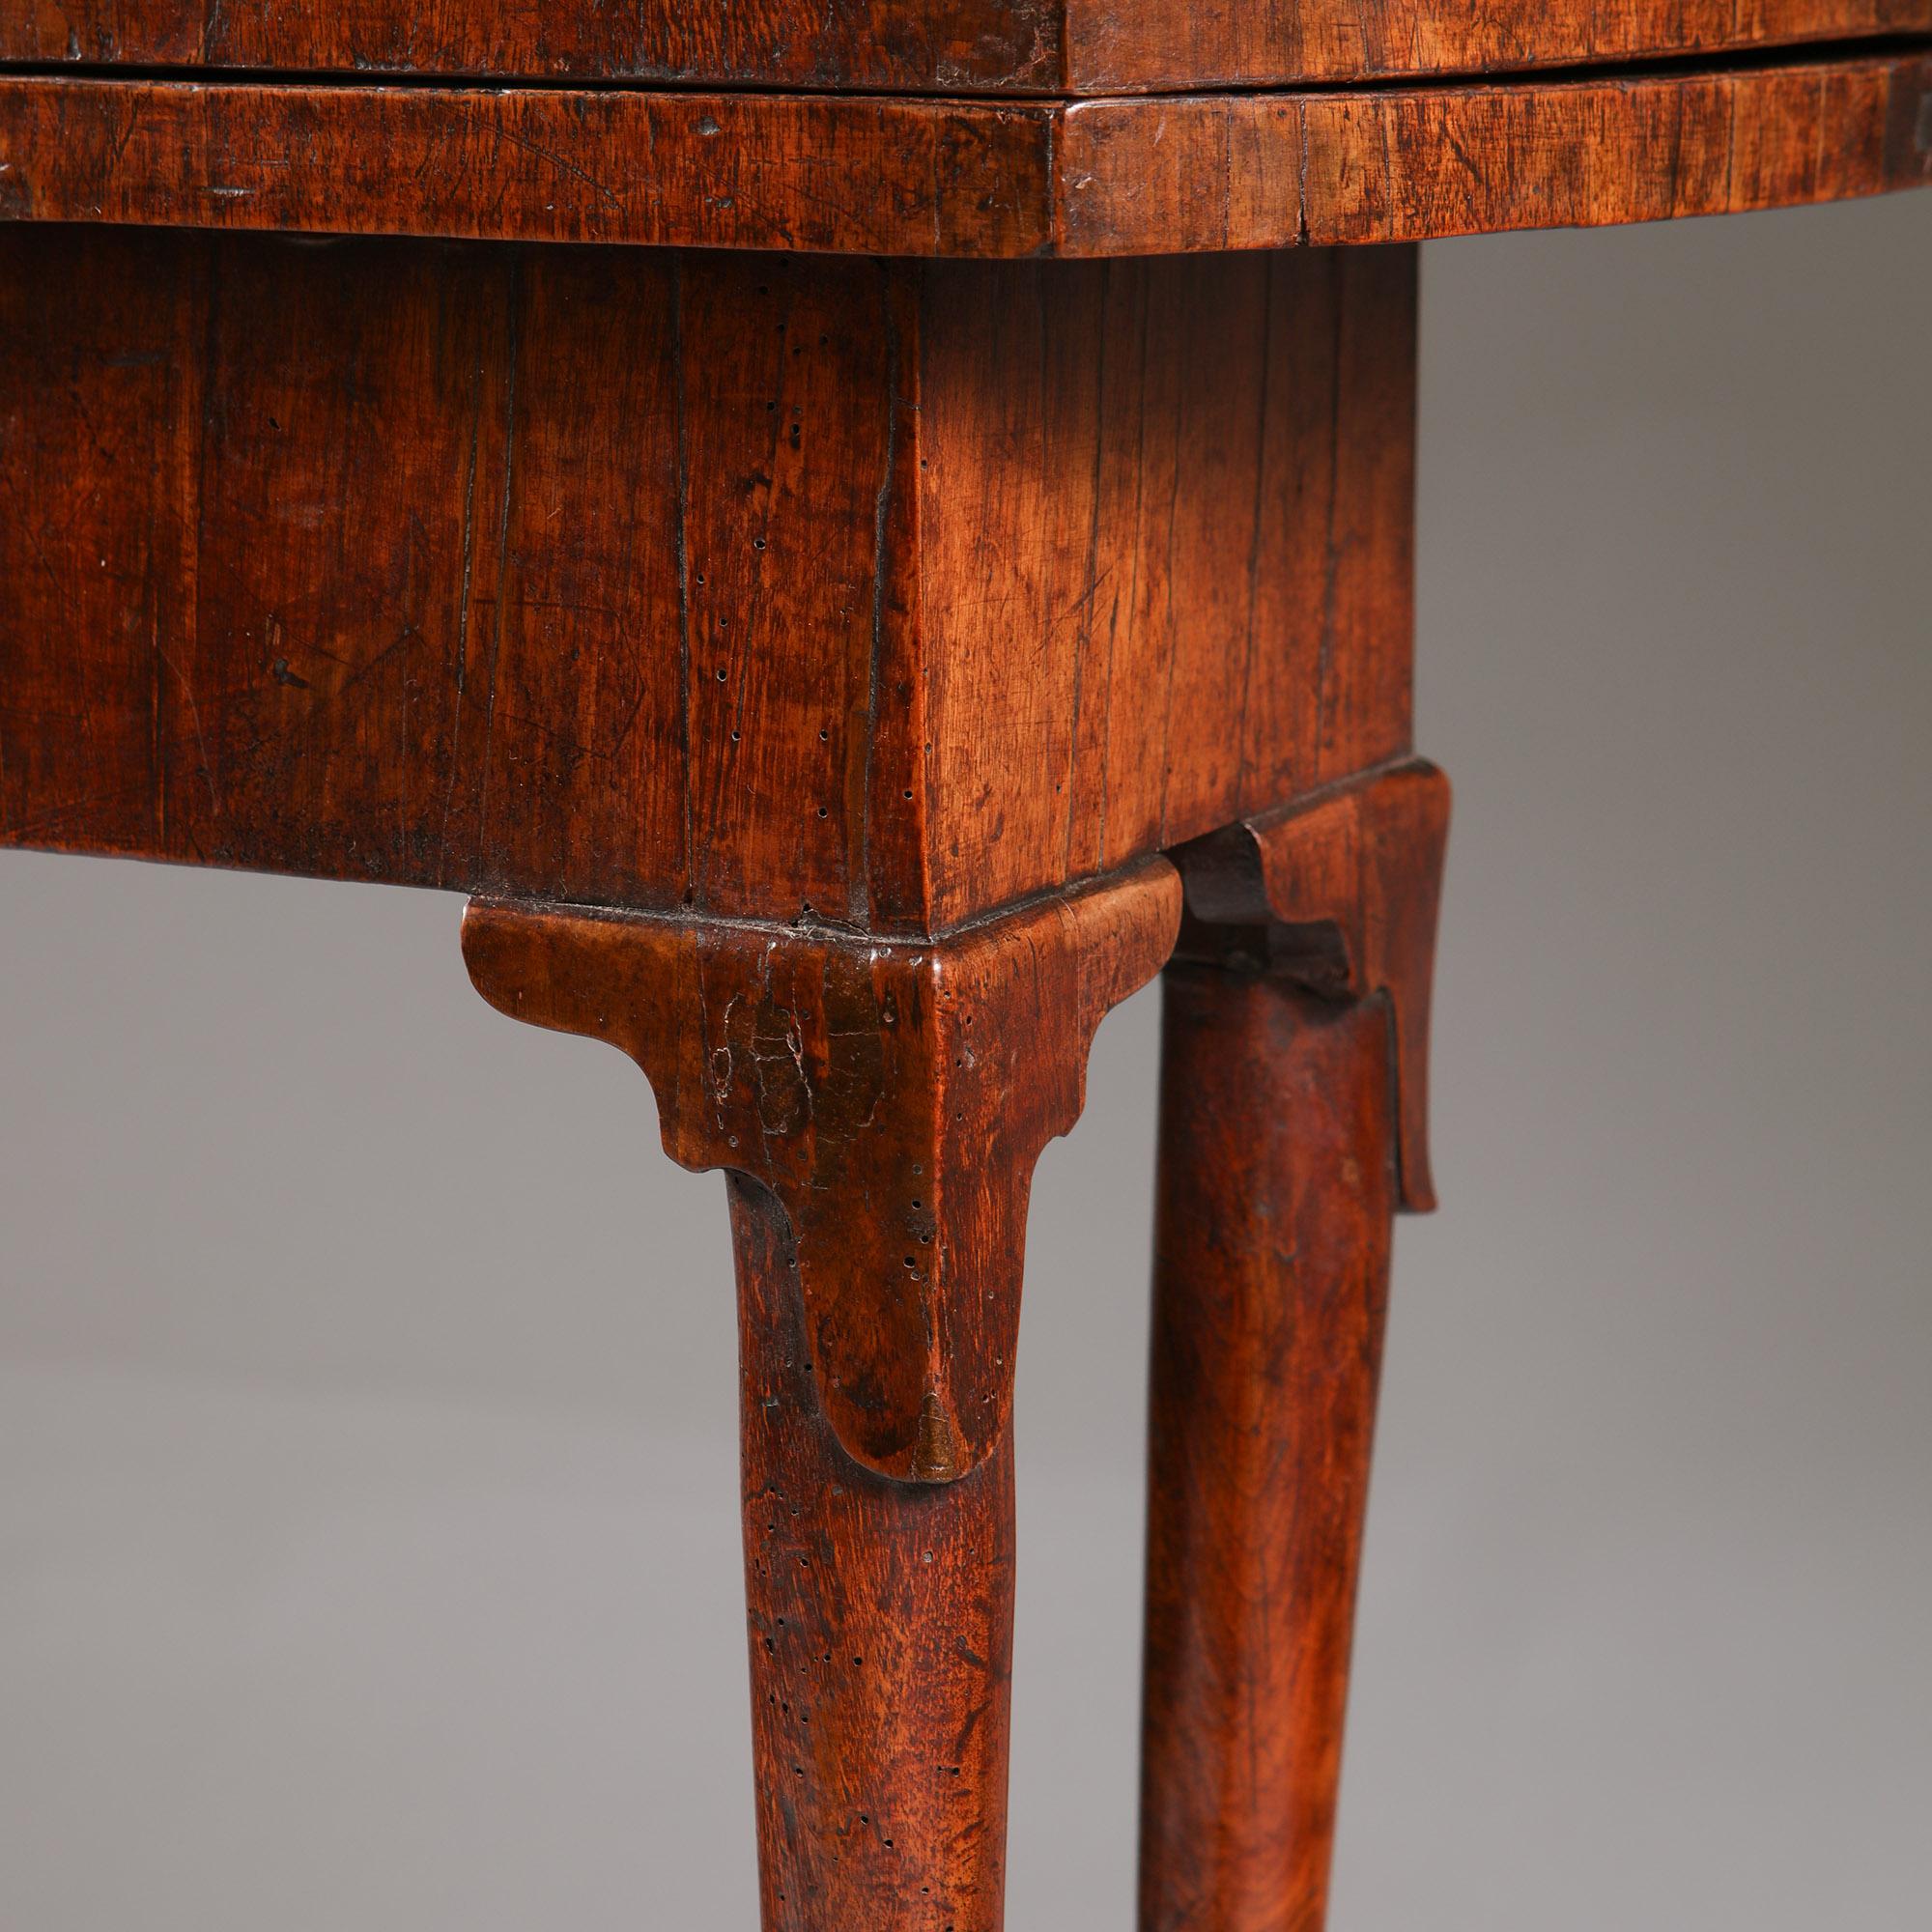 A Unique Early 18th Century Diminutive George I Figured Walnut Bachelors Table For Sale 2